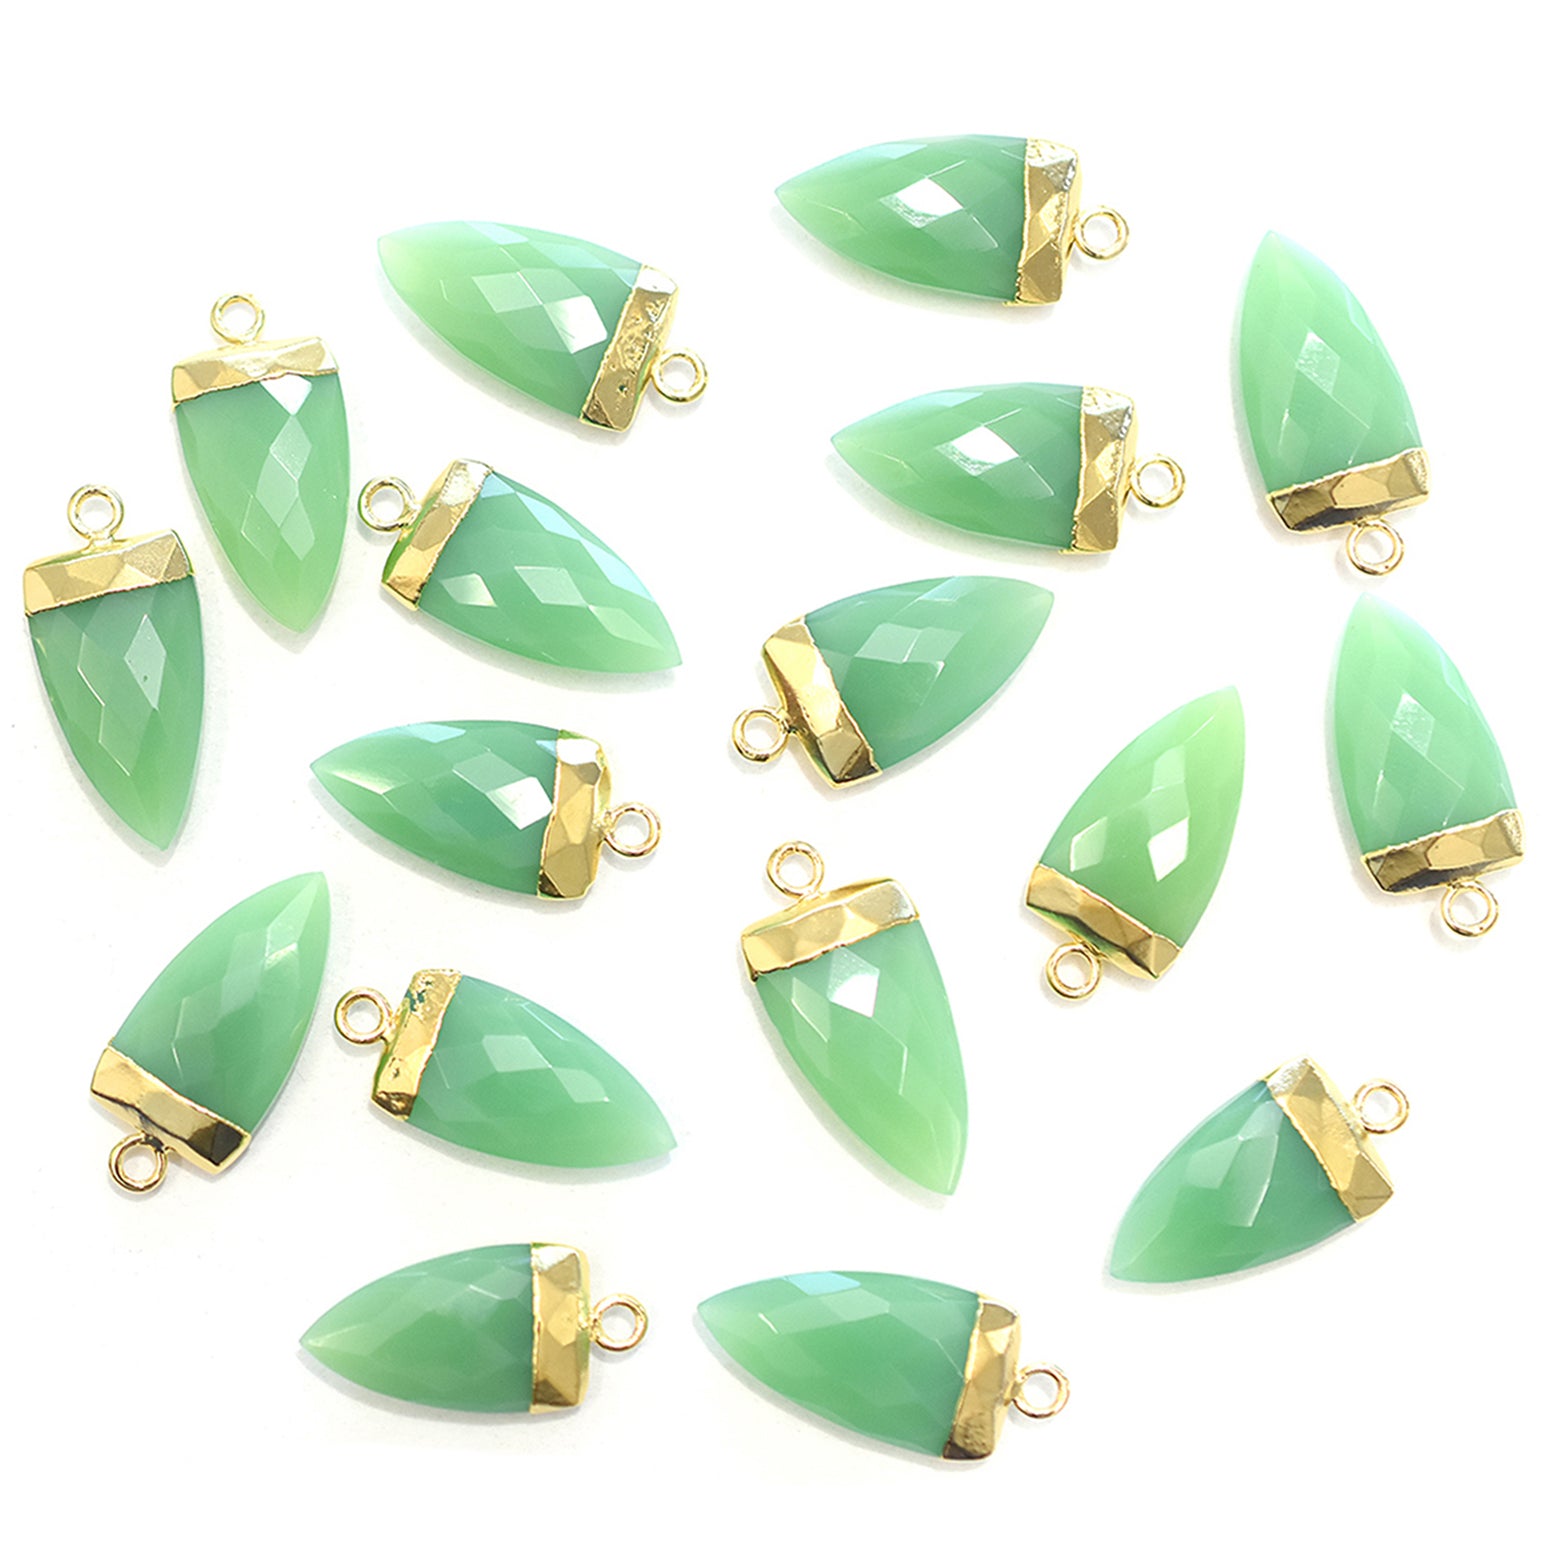 Chrysoprase Chalcedony 14X9 MM Arrow Shape Gold Electroplated Pendant